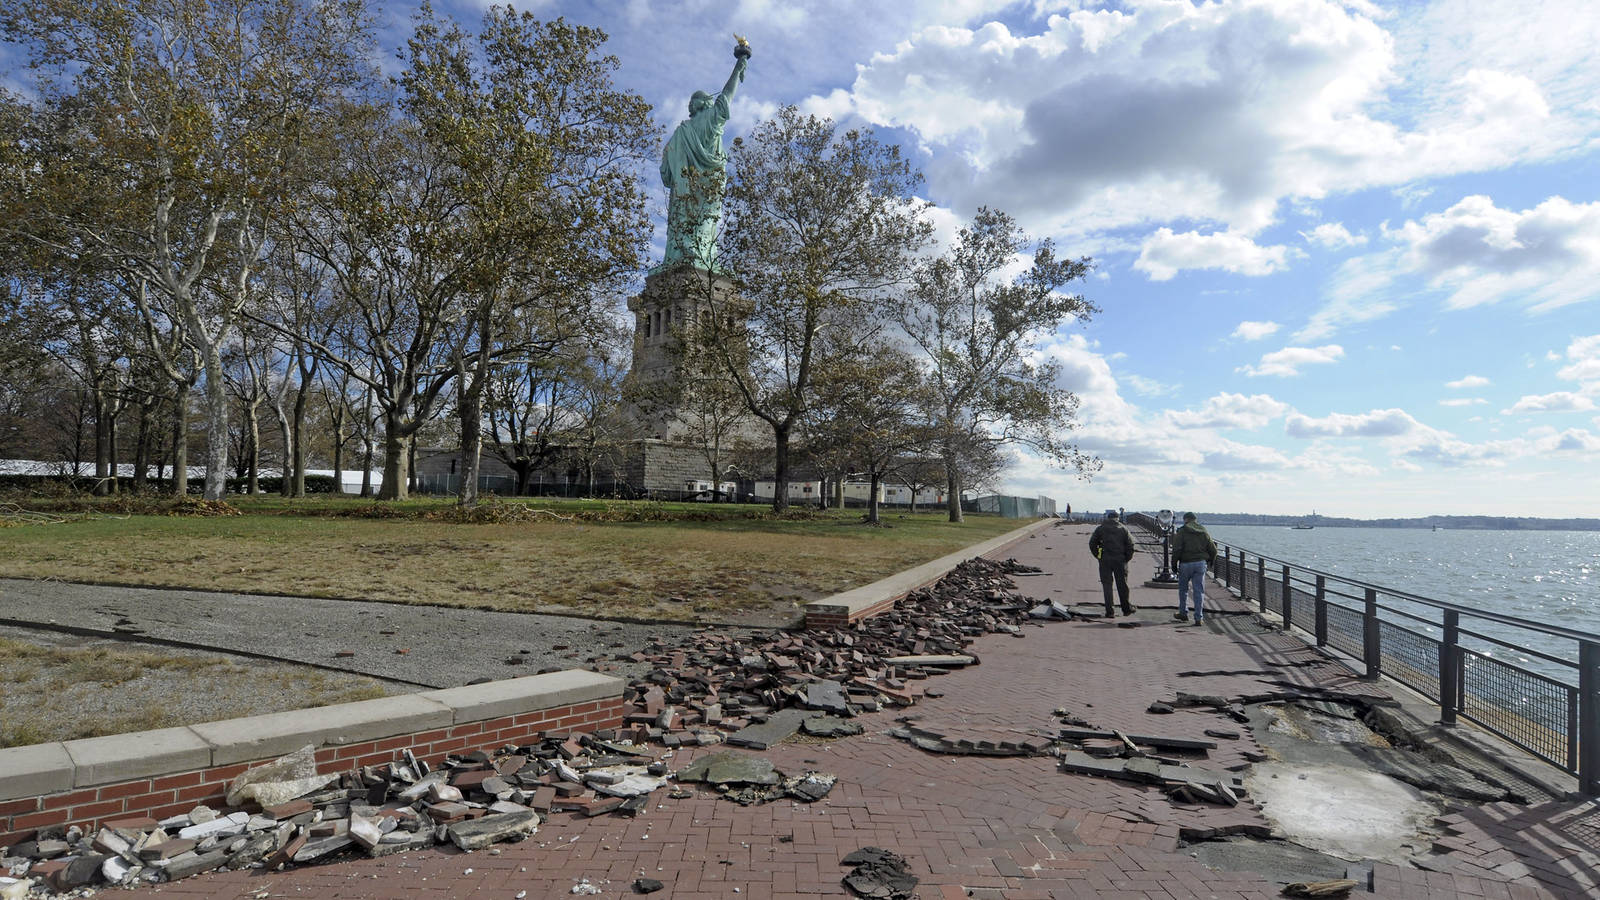 <p>NPS Incident Management Team walk along the southern walkway of Liberty Island to assess the damage following Superstorm Sandy in 2012. Paving bricks were uplifted and underlying pavement damaged during the storm.</p>